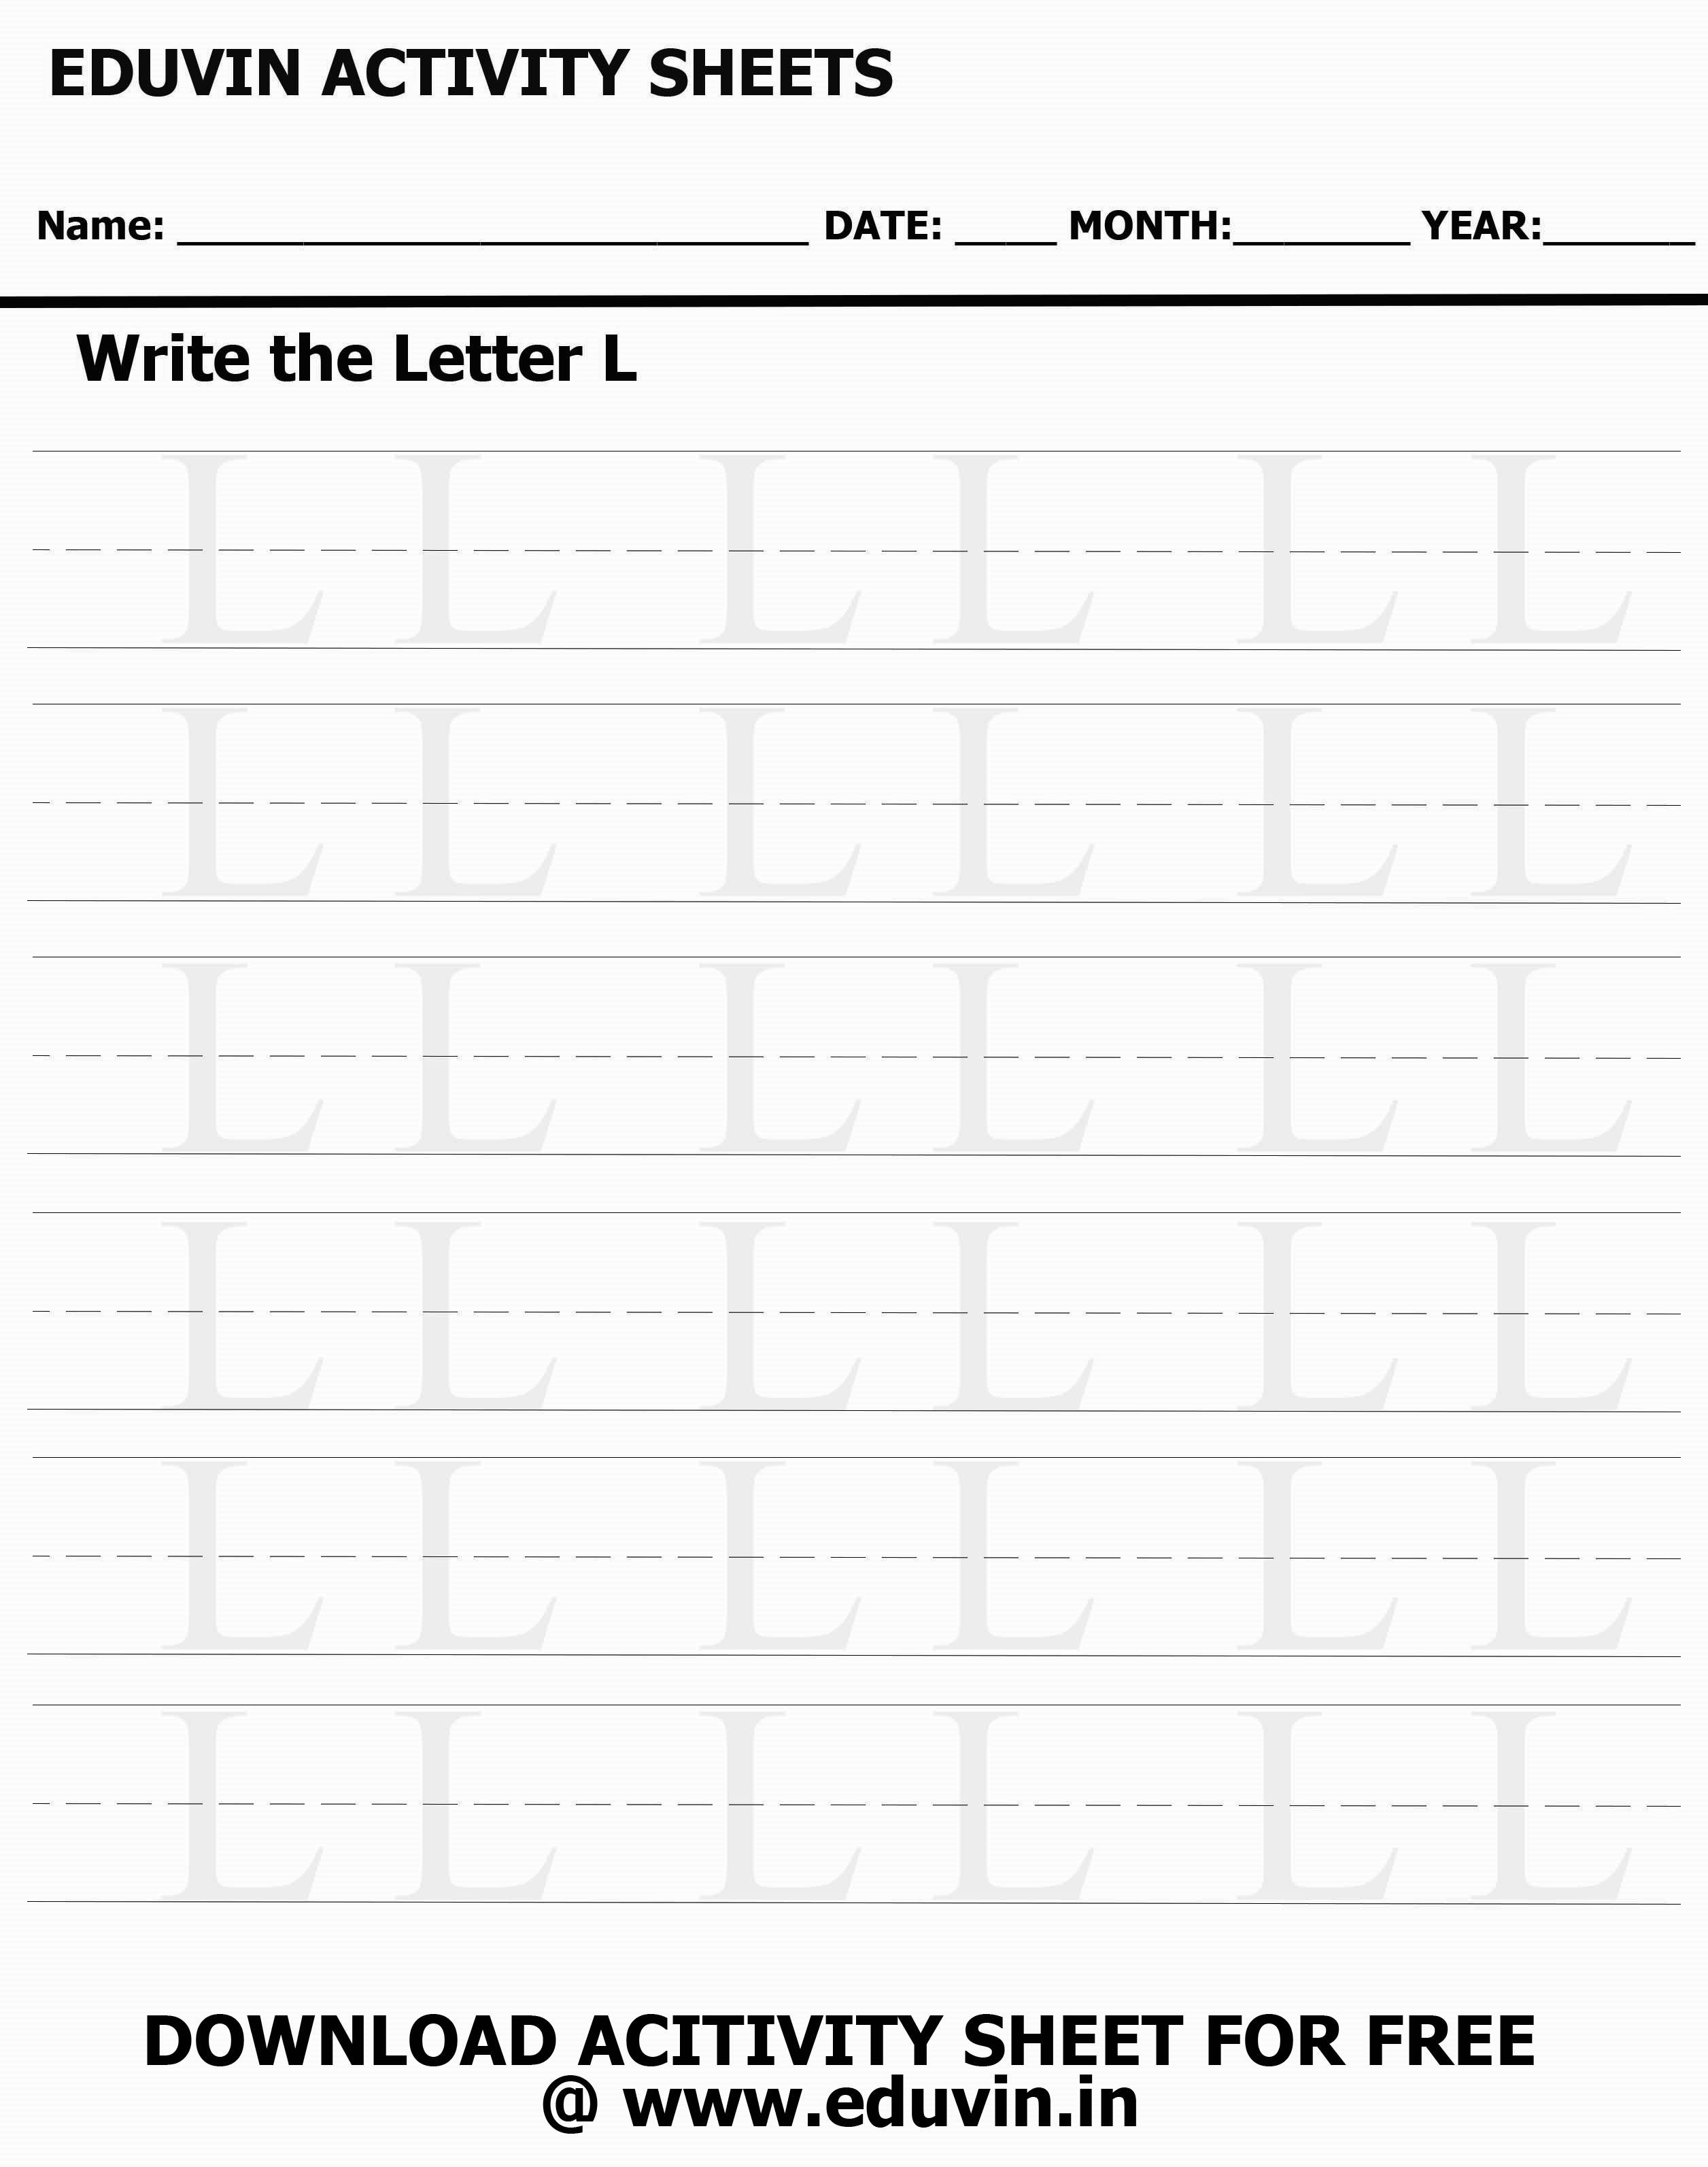 LETTER L Activity Sheet For Tracing and Letter Writing For Kids